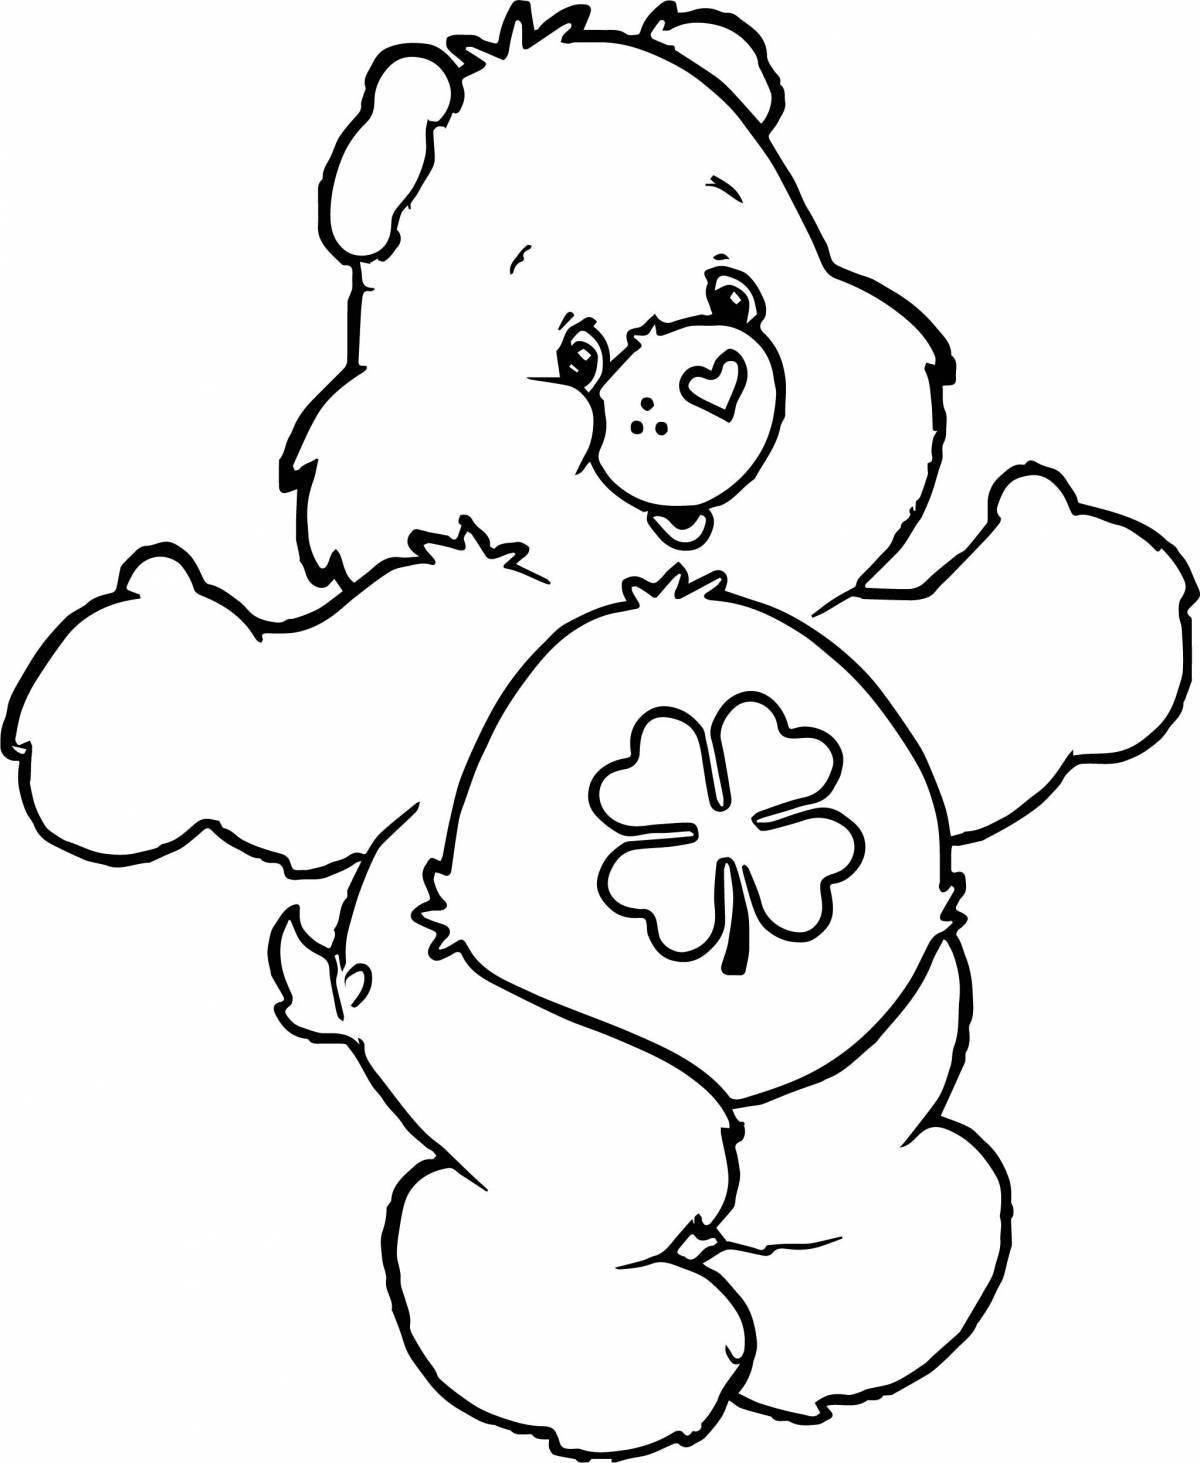 Cozy care bears coloring page